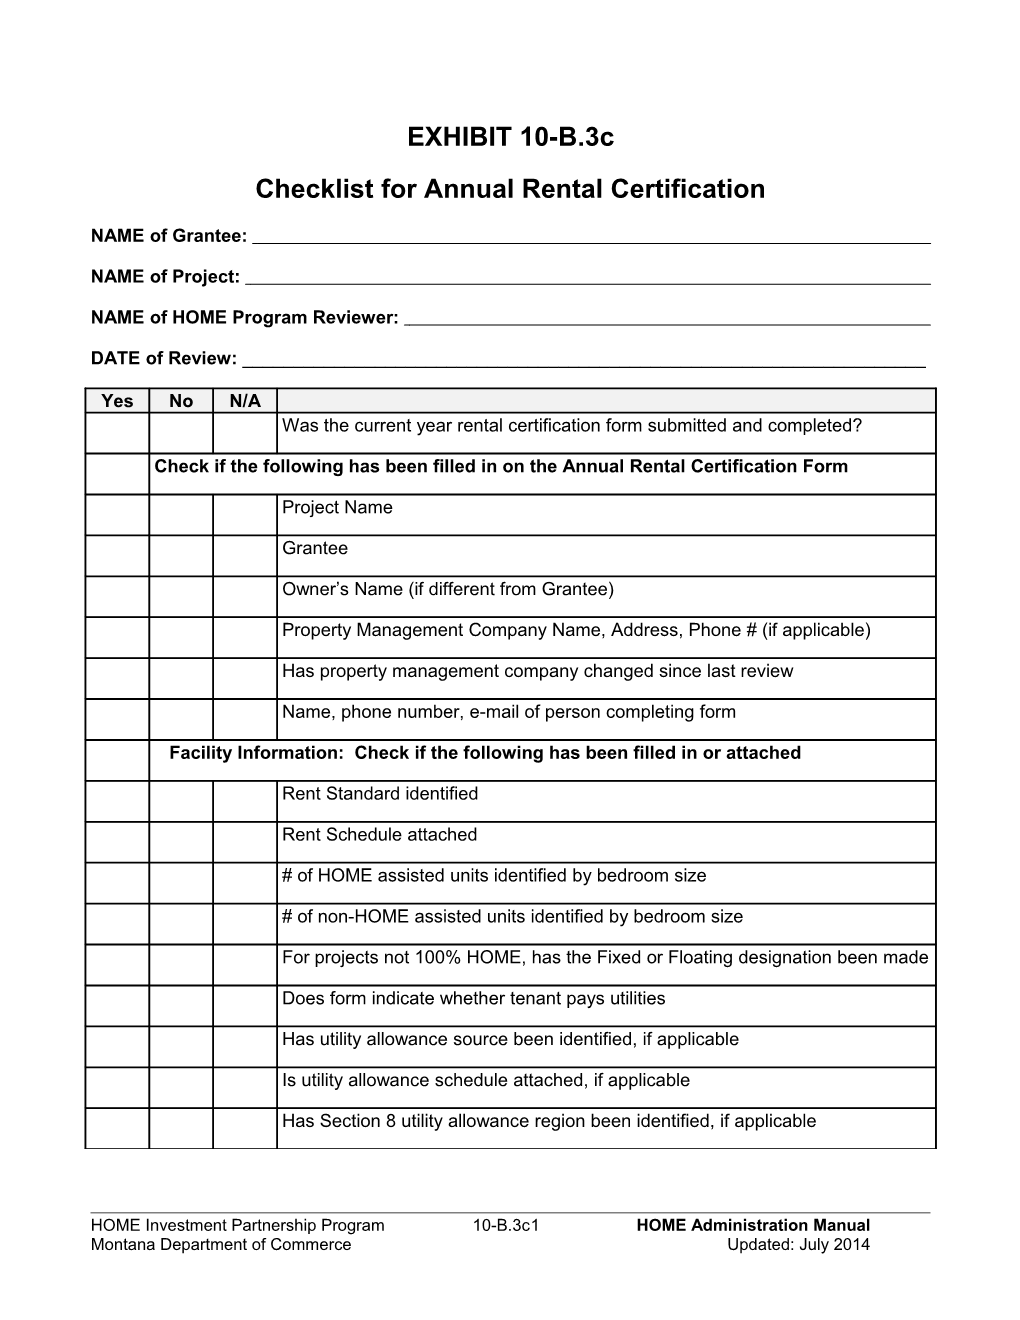 Checklist for Annual Rental Certification